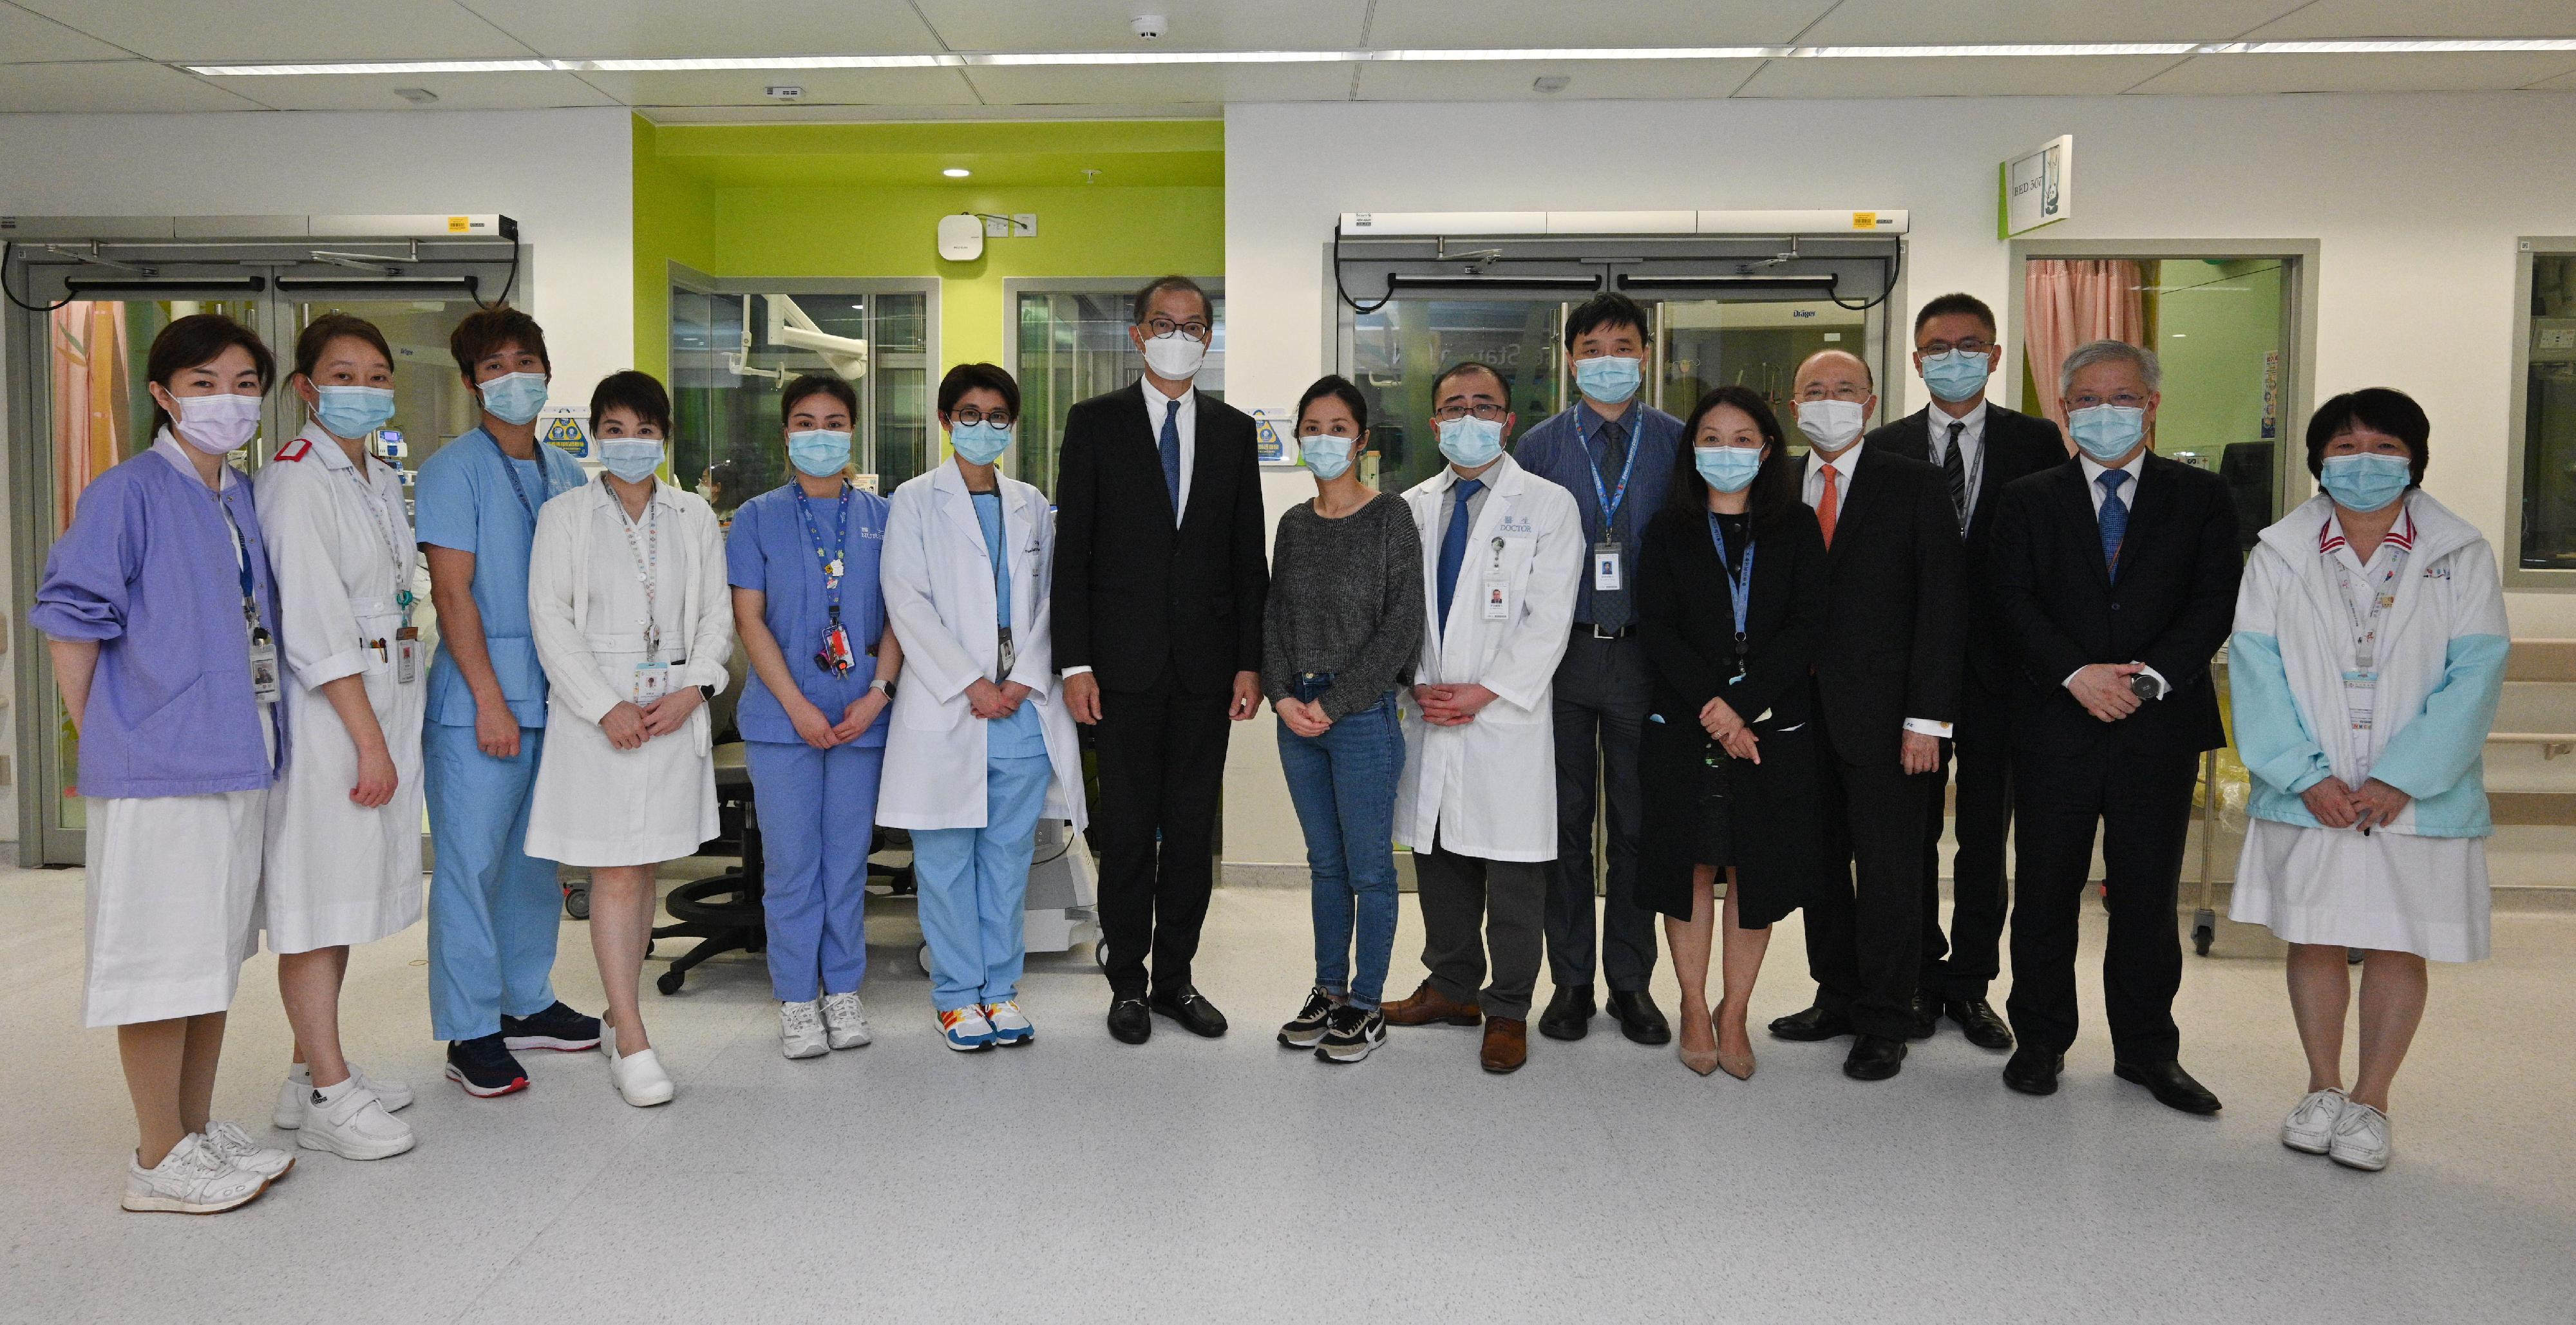 The Secretary for Health, Professor Lo Chung-mau, visited the Hong Kong Children's Hospital today (February 2). Photo shows Professor Lo (seventh left) and mother of Tsz-hei in a group photo with the medical team treating Tsz-hei.